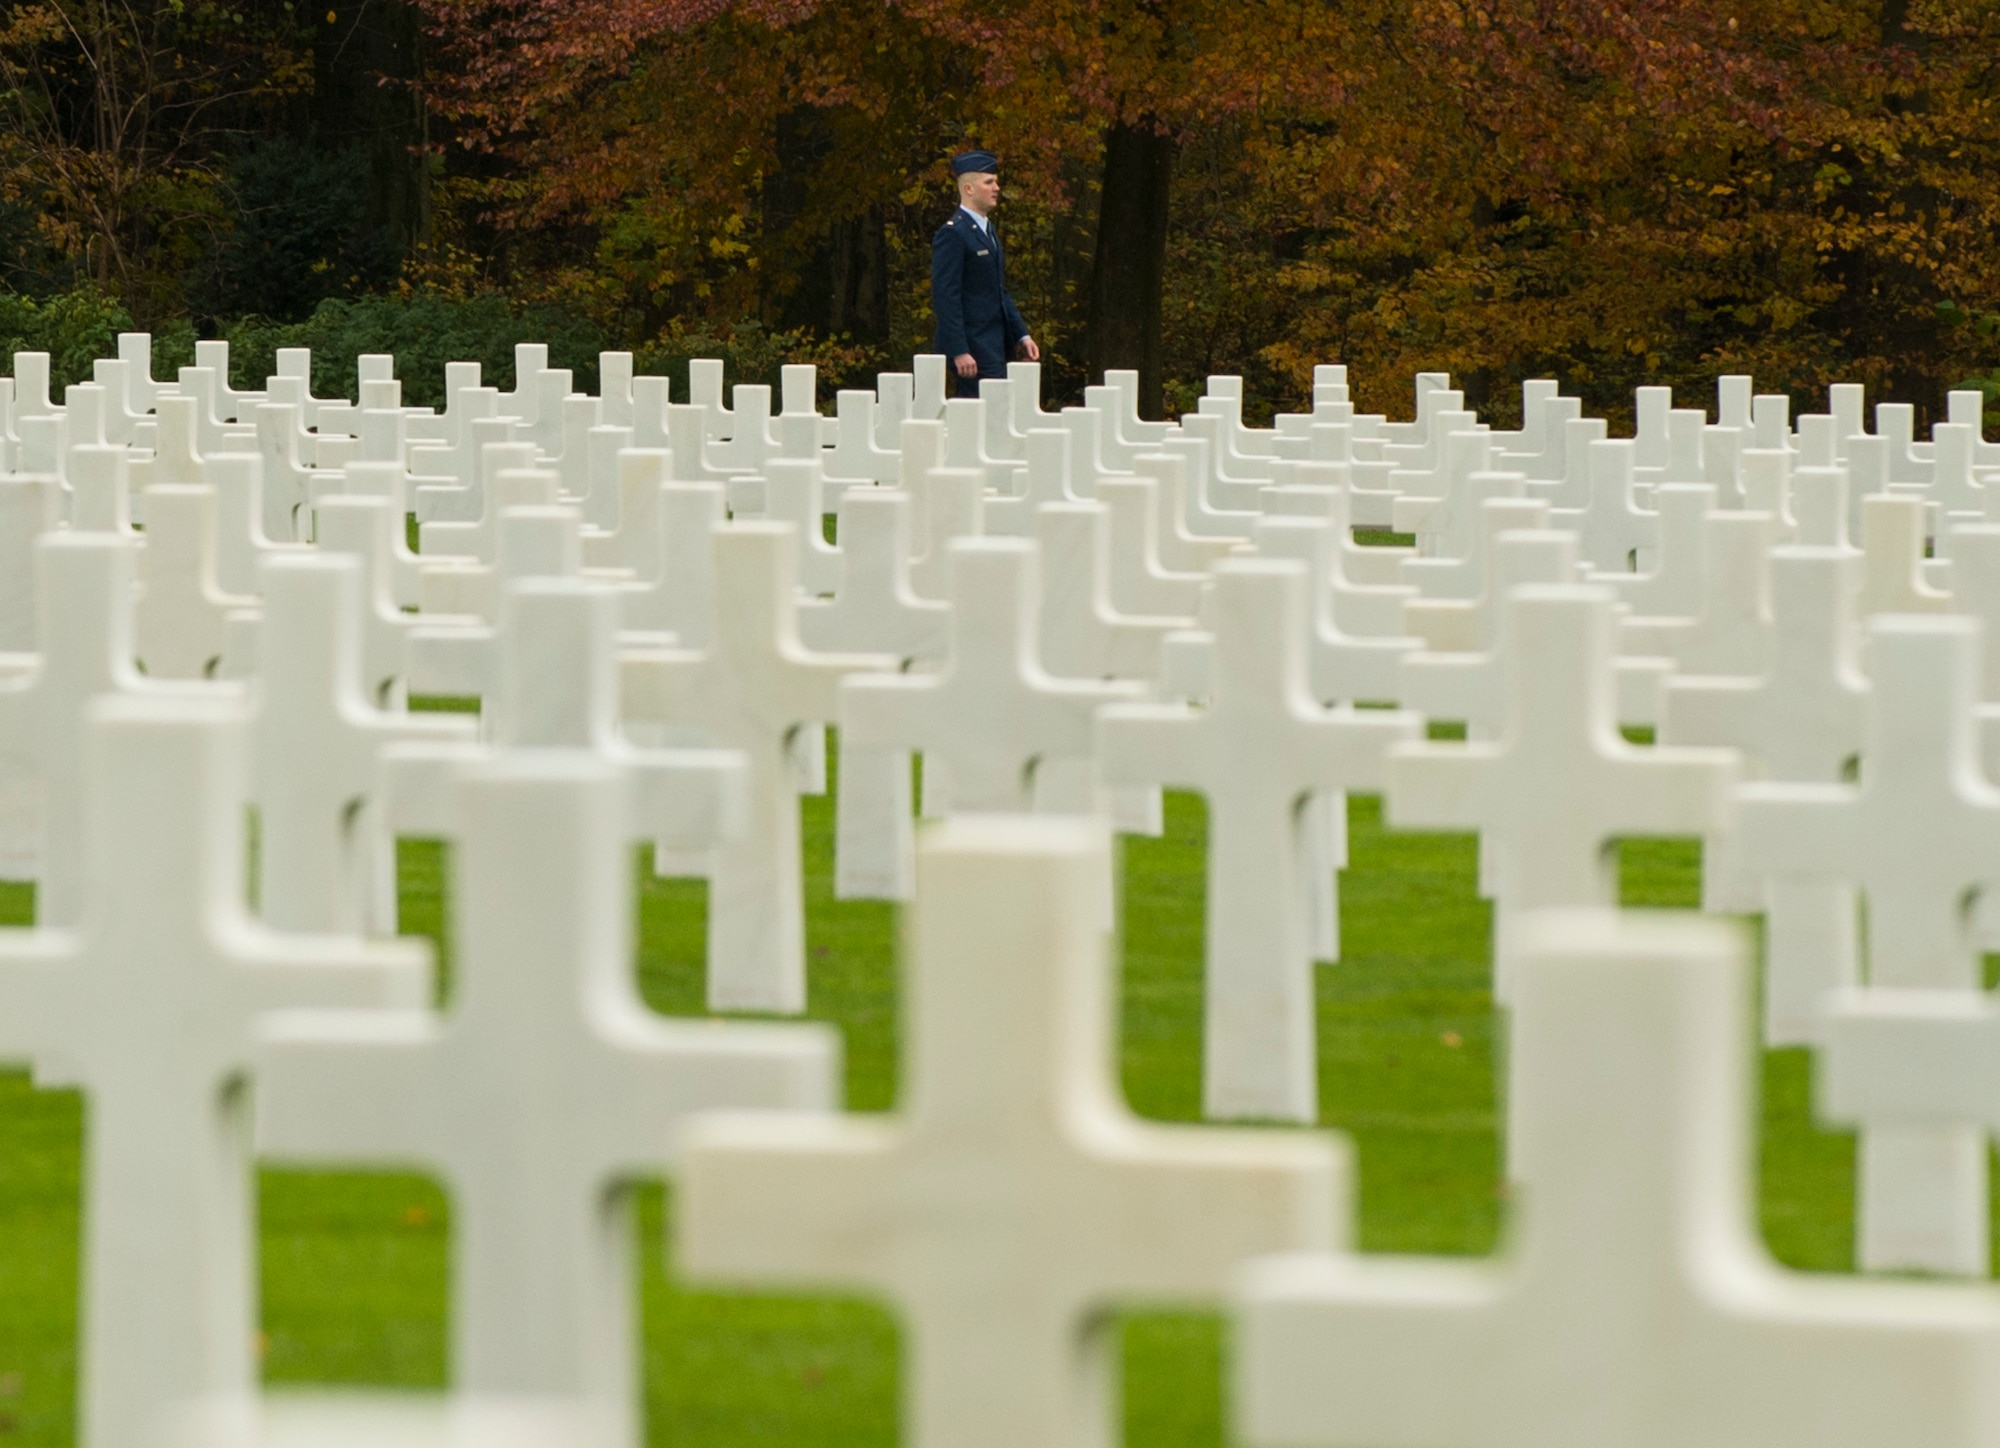 A U.S. Air Force Airman walks among white marble crosses and stars marking the burial sites of American service members at the Luxembourg American Cemetery and Memorial in Hamm, Luxembourg City, Luxembourg, Nov. 11, 2016. Approximately 5,076 U.S. service members who died during World War II are buried at this site. (U.S. Air Force photo by Senior Airman Dawn M. Weber)